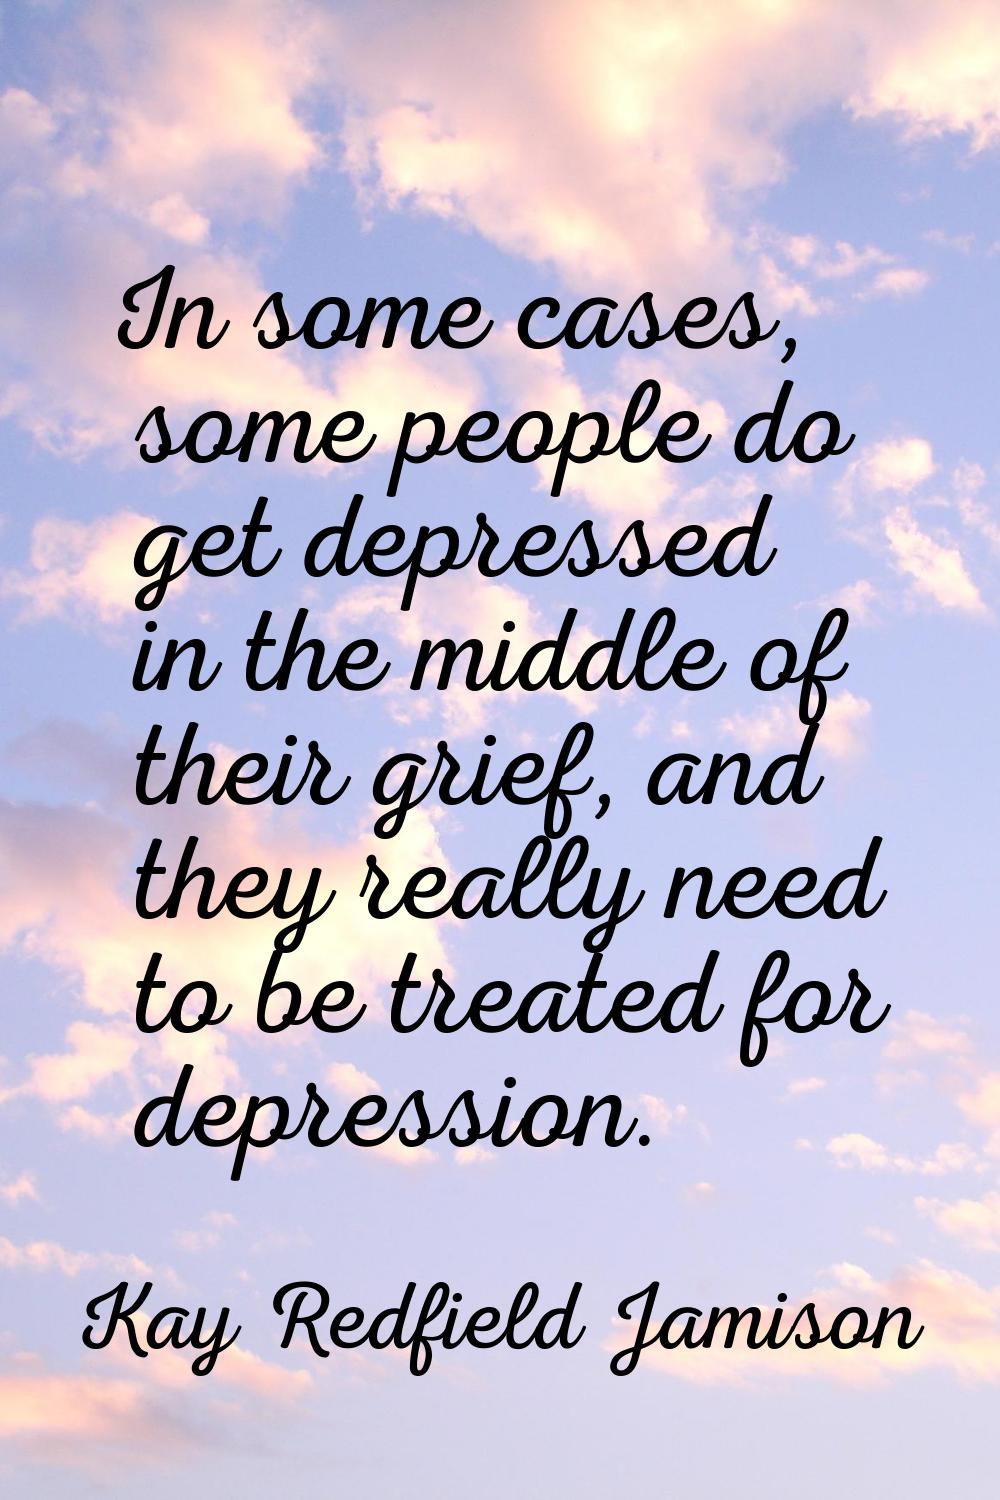 In some cases, some people do get depressed in the middle of their grief, and they really need to b